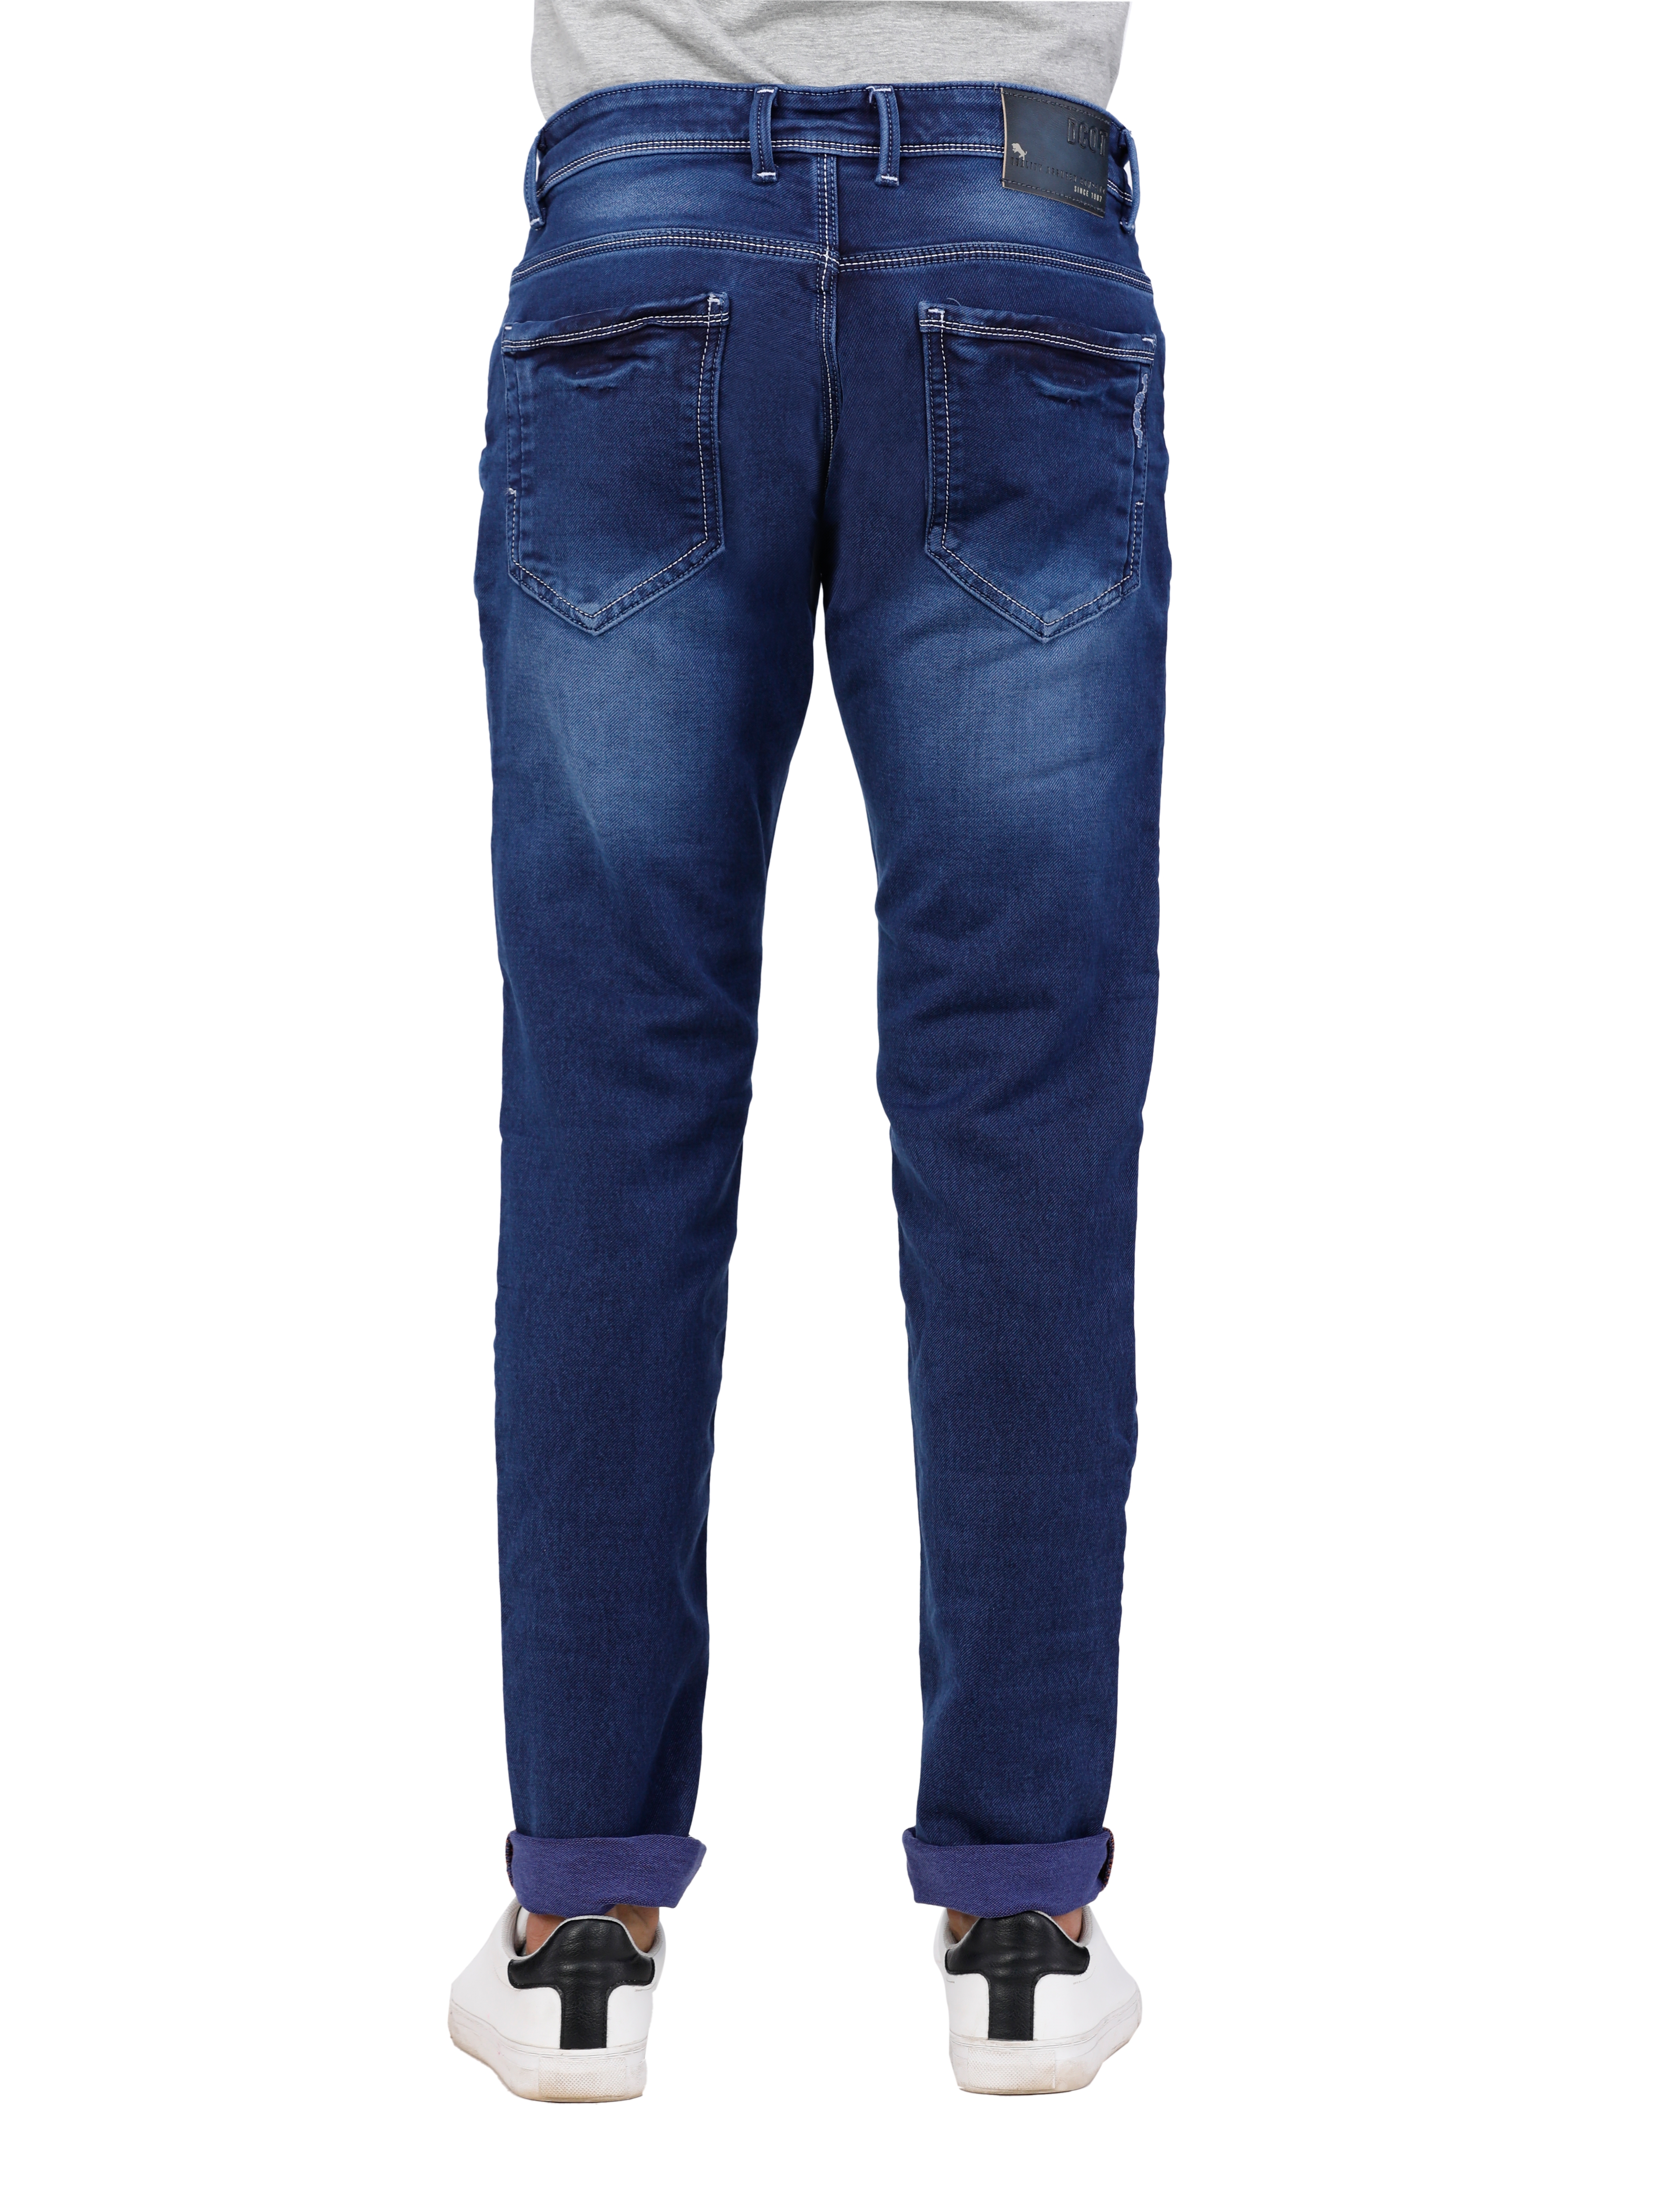 D'cot by Donear | D'cot by Donear Men Blue Cotton Slim Knitted Jeans 1